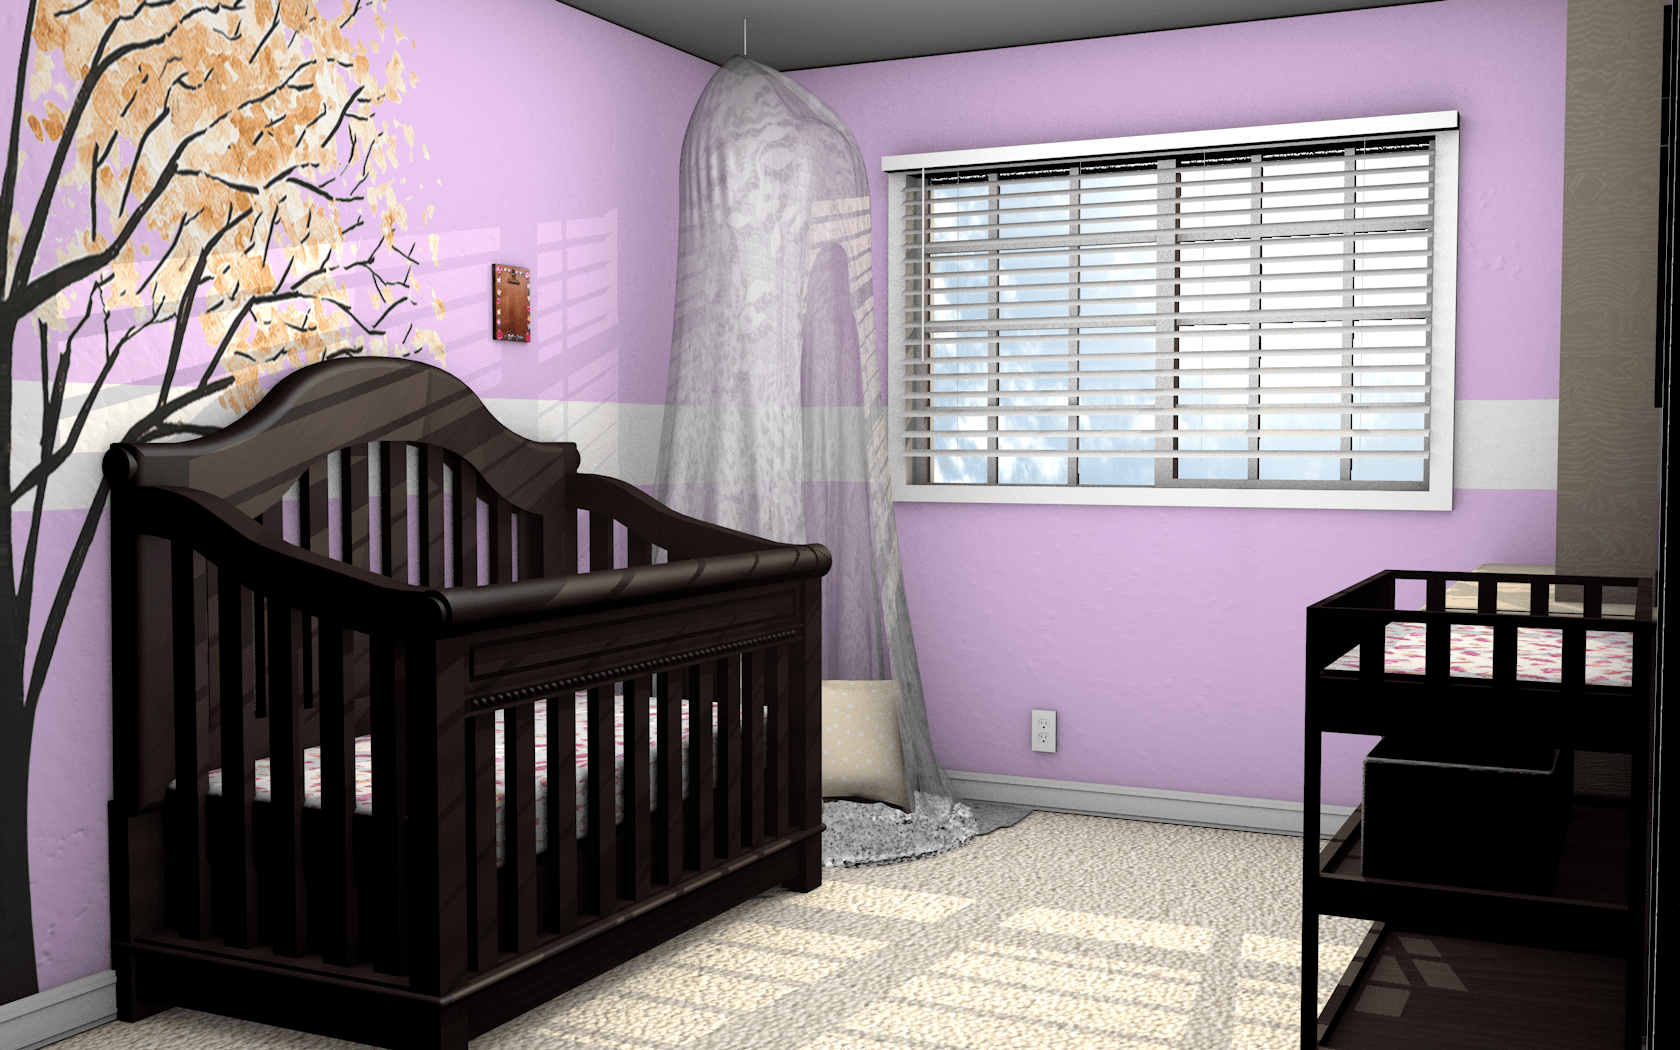 3D Pink & Purple Nursery Plans for Baby Girl